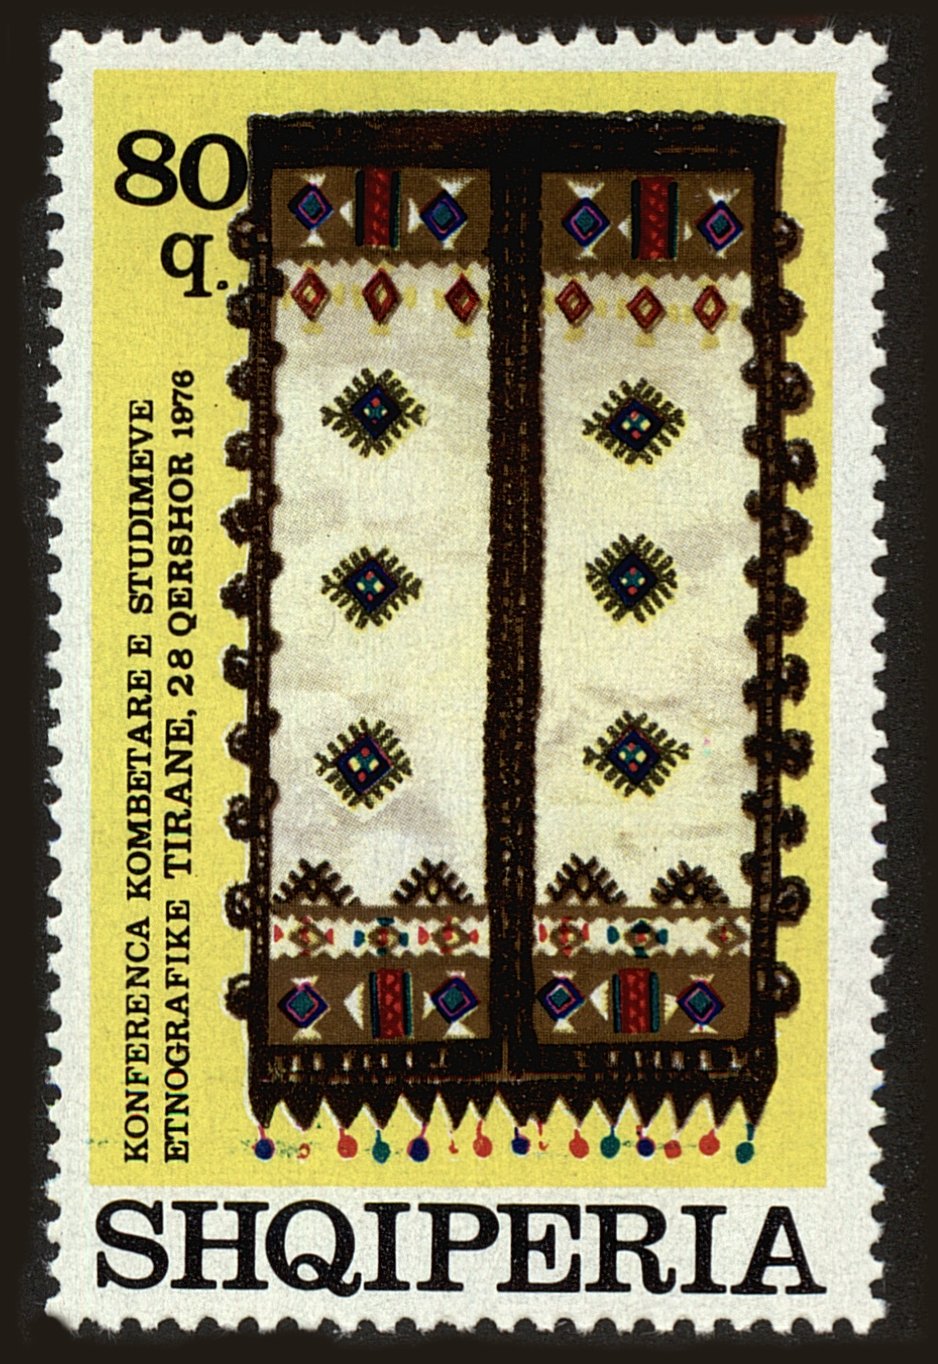 Front view of Albania 1737 collectors stamp